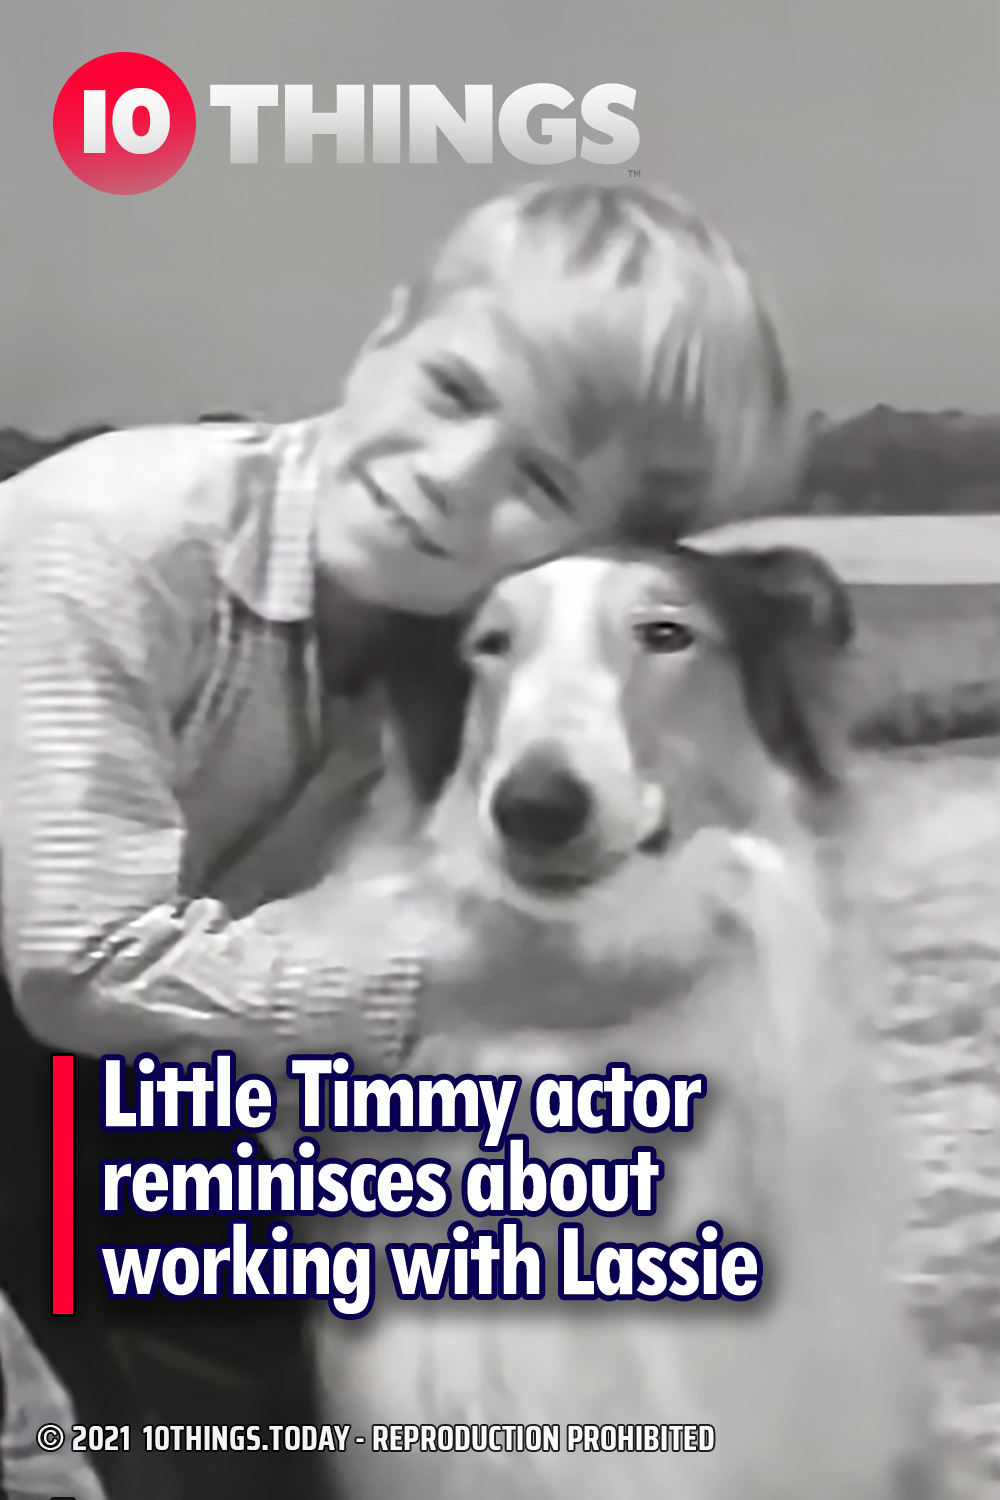 Little Timmy actor reminisces about working with Lassie